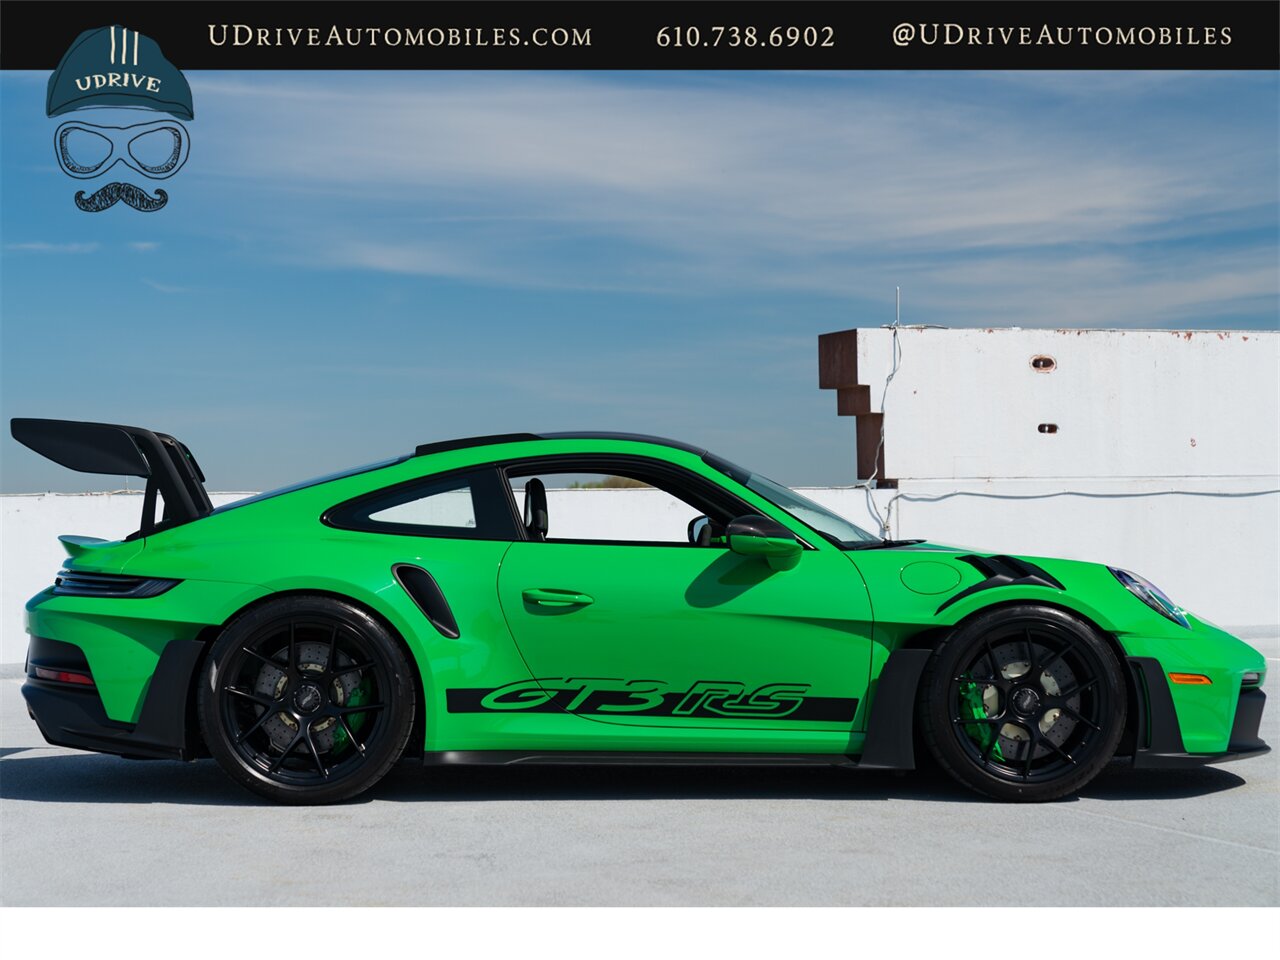 2023 Porsche 911 GT3 RS  Weissach Pkg FAL Full Body PPF $43k in Extras - Photo 23 - West Chester, PA 19382